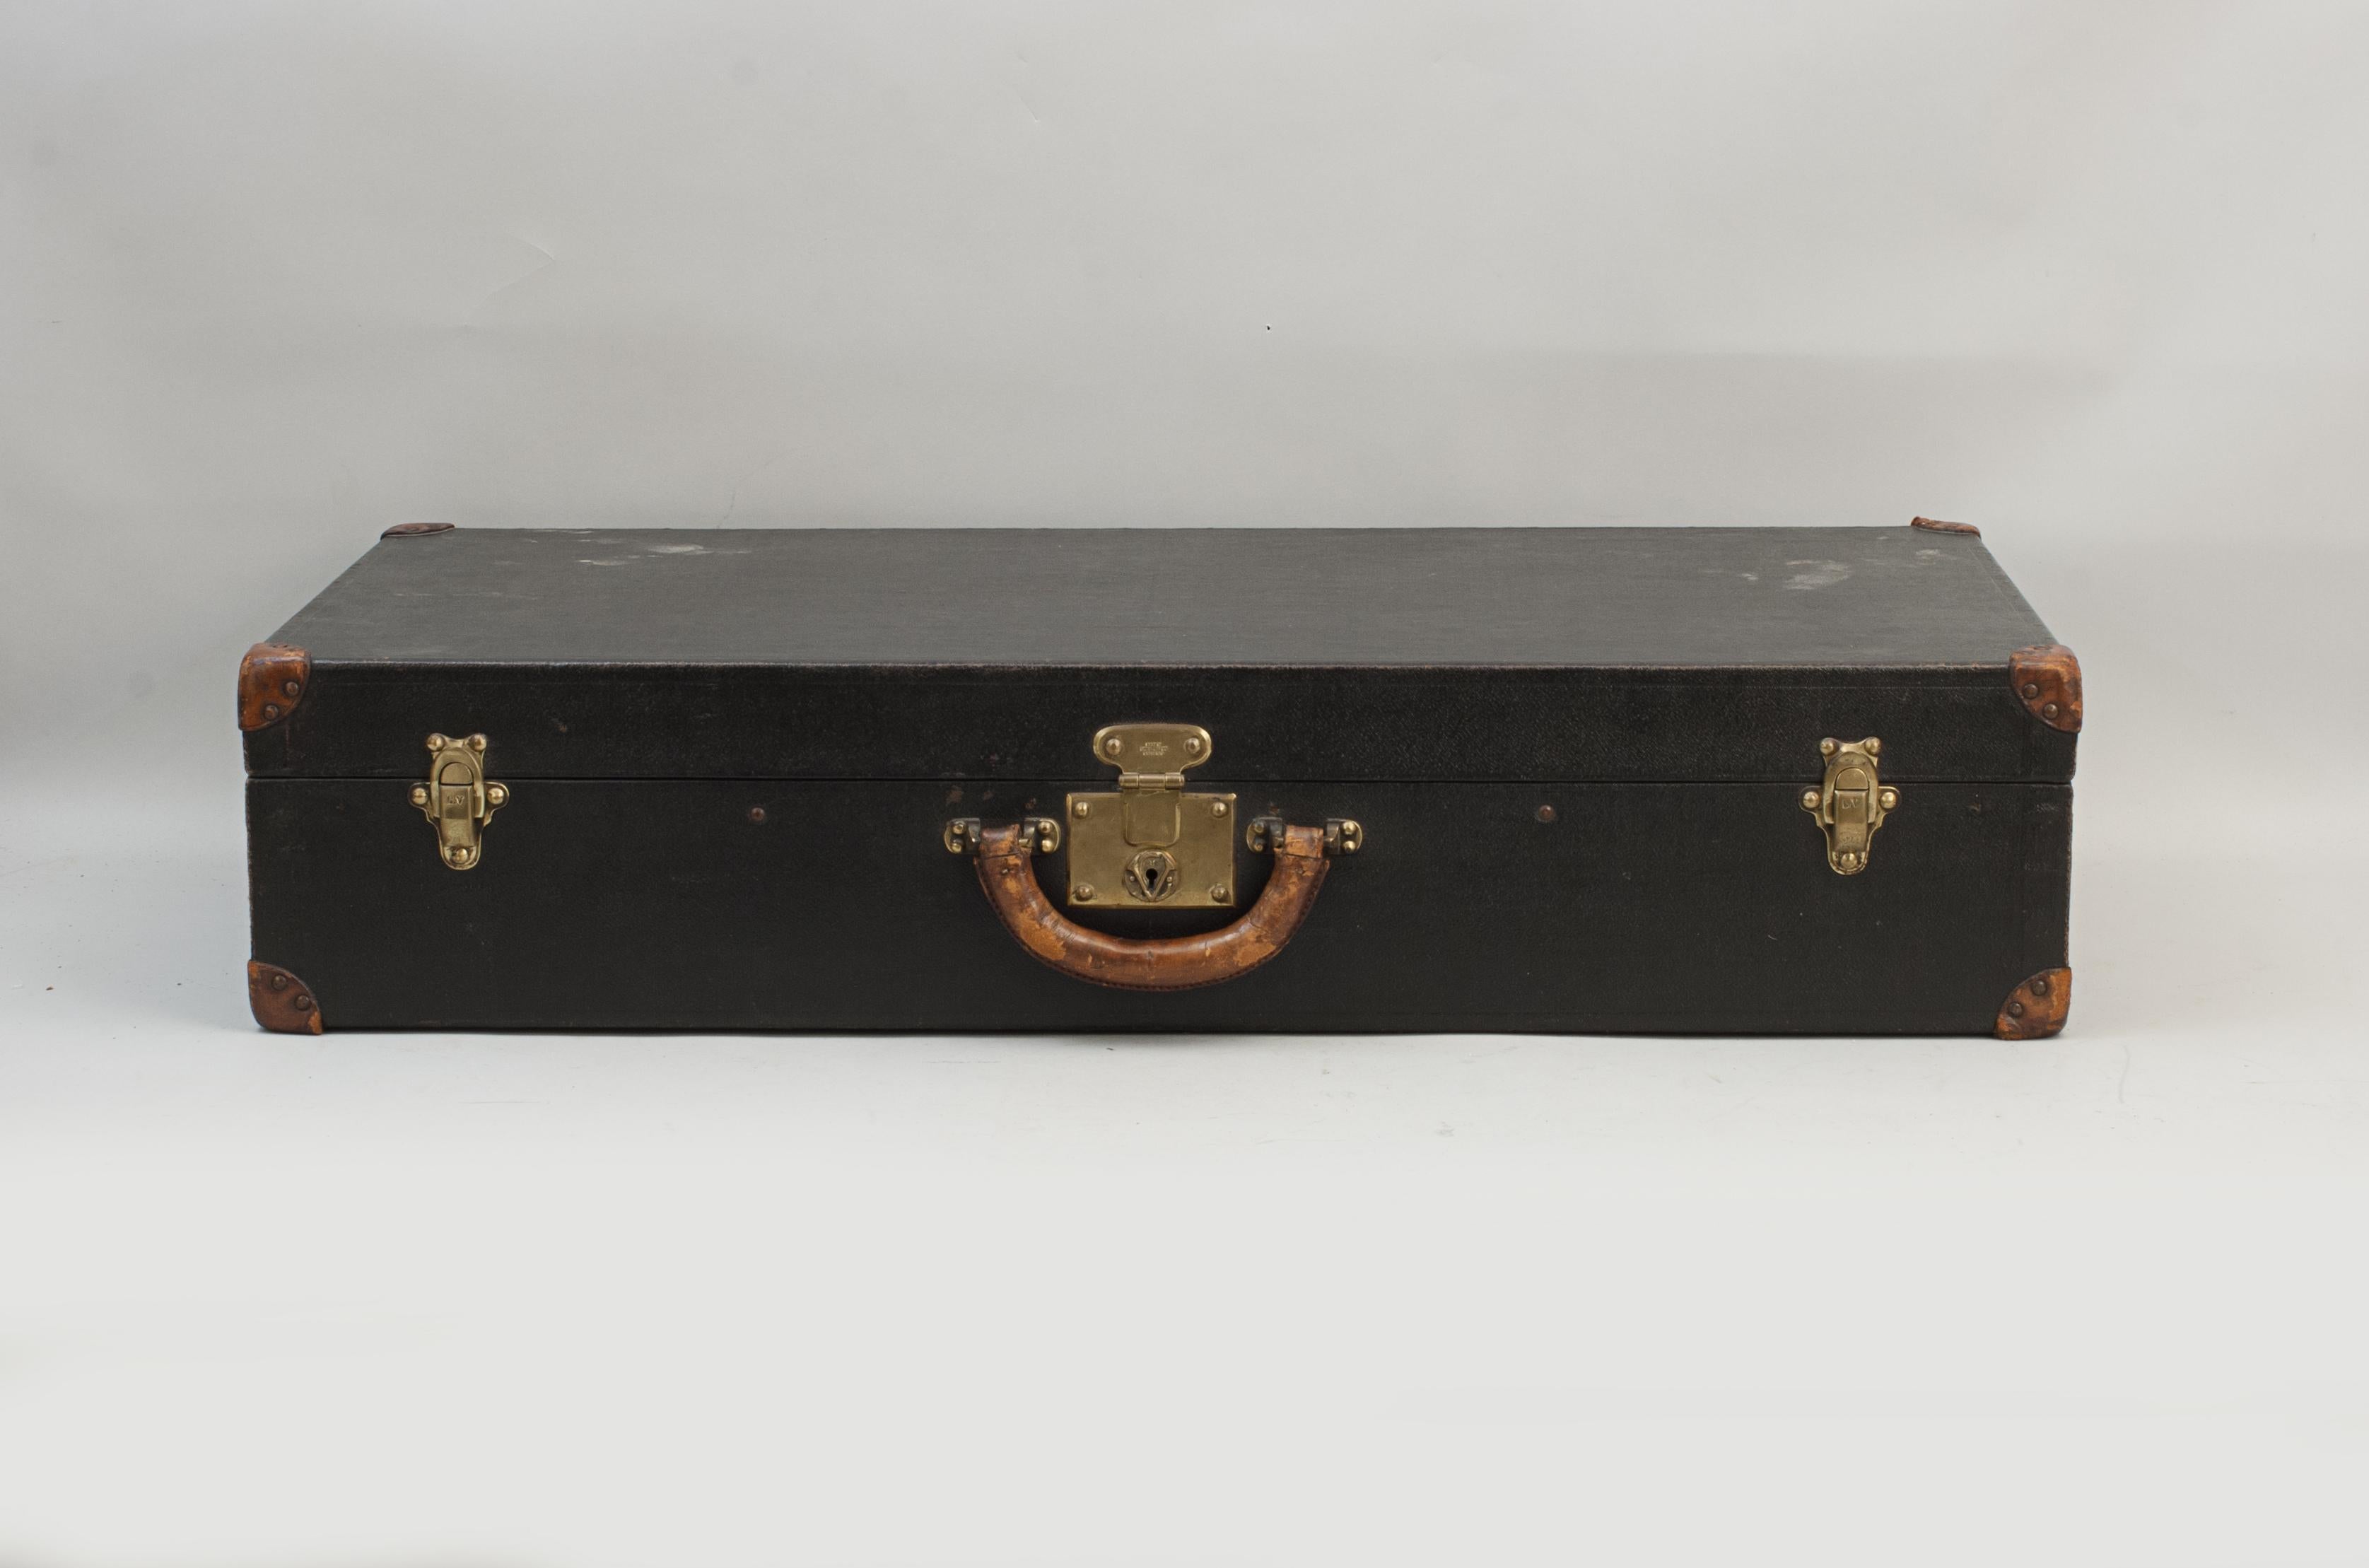 Louis Vuitton Car, Motoring Trunk.
The Louis Vuitton motoring luggage case is in good usable condition with two brass lever clips to keep the lid firmly closed, one central lock and leather carry handle. All brass fittings with 'LV' and there is